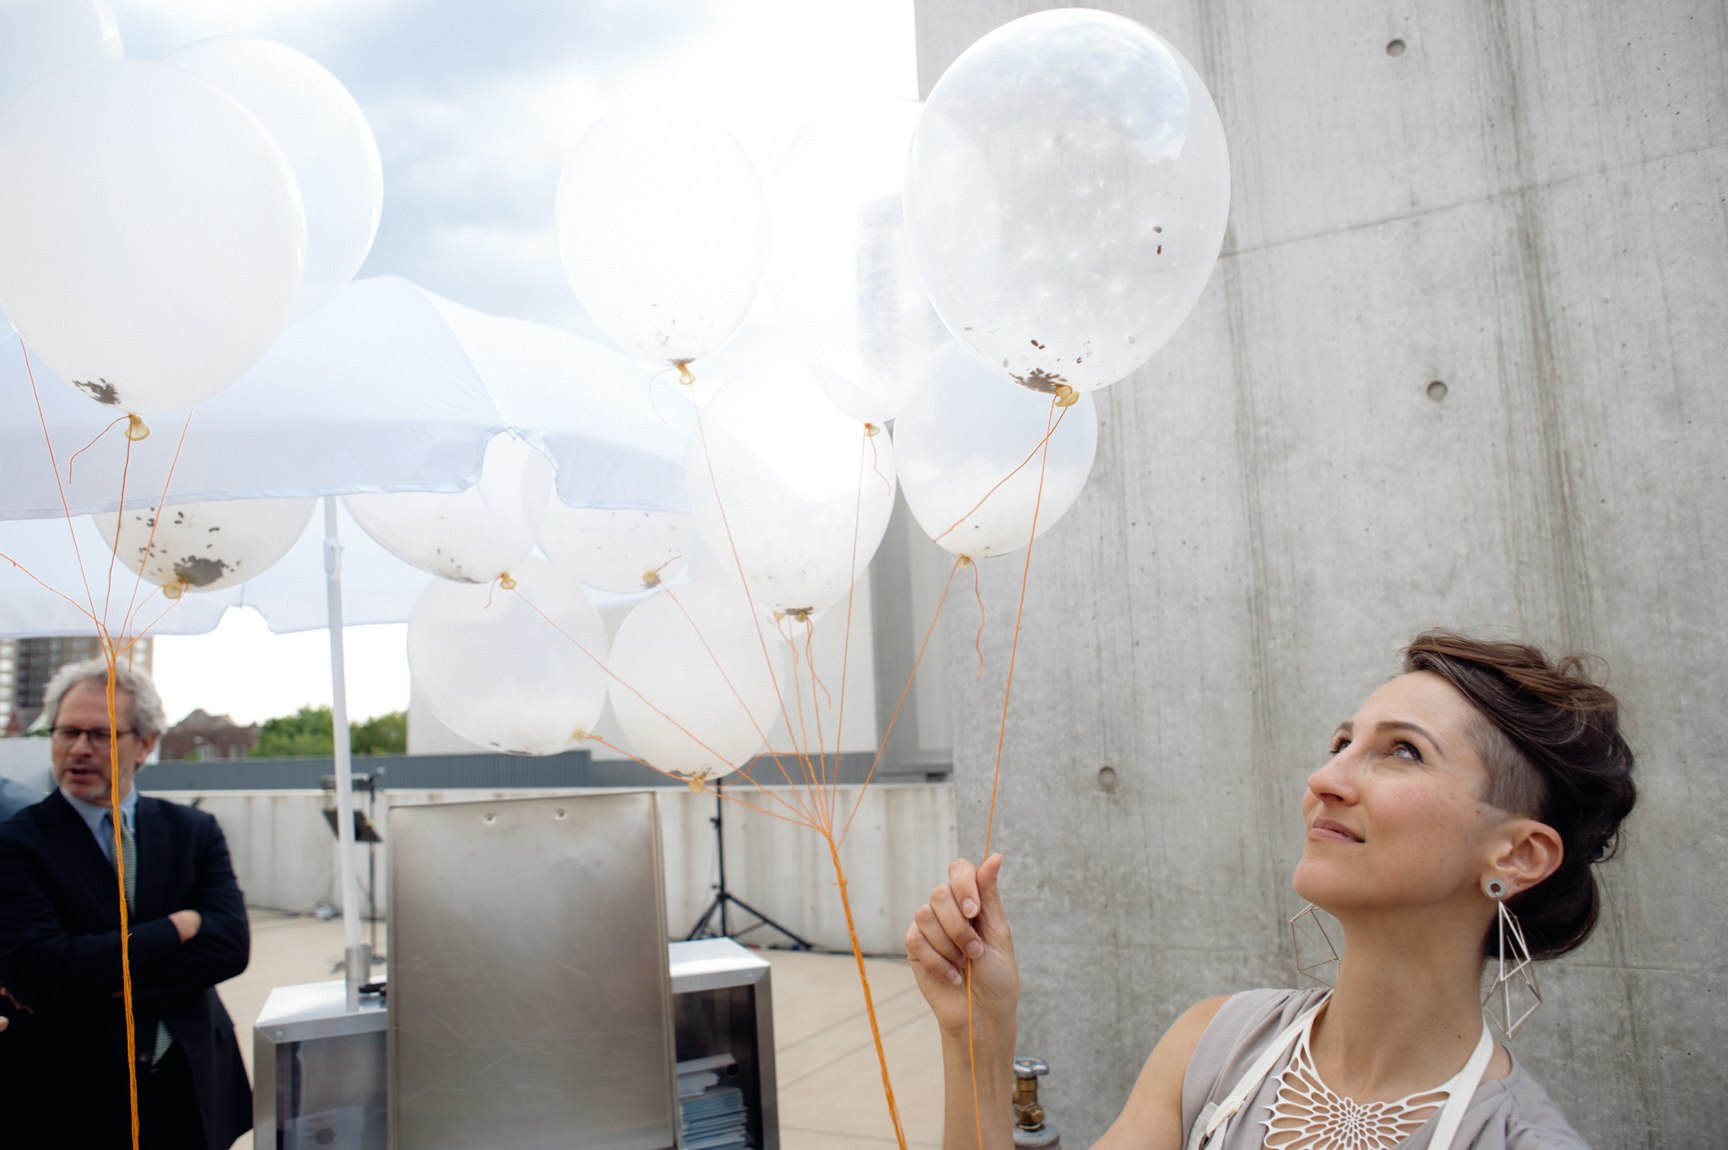 A visitor looks up at their bundle of white balloons.